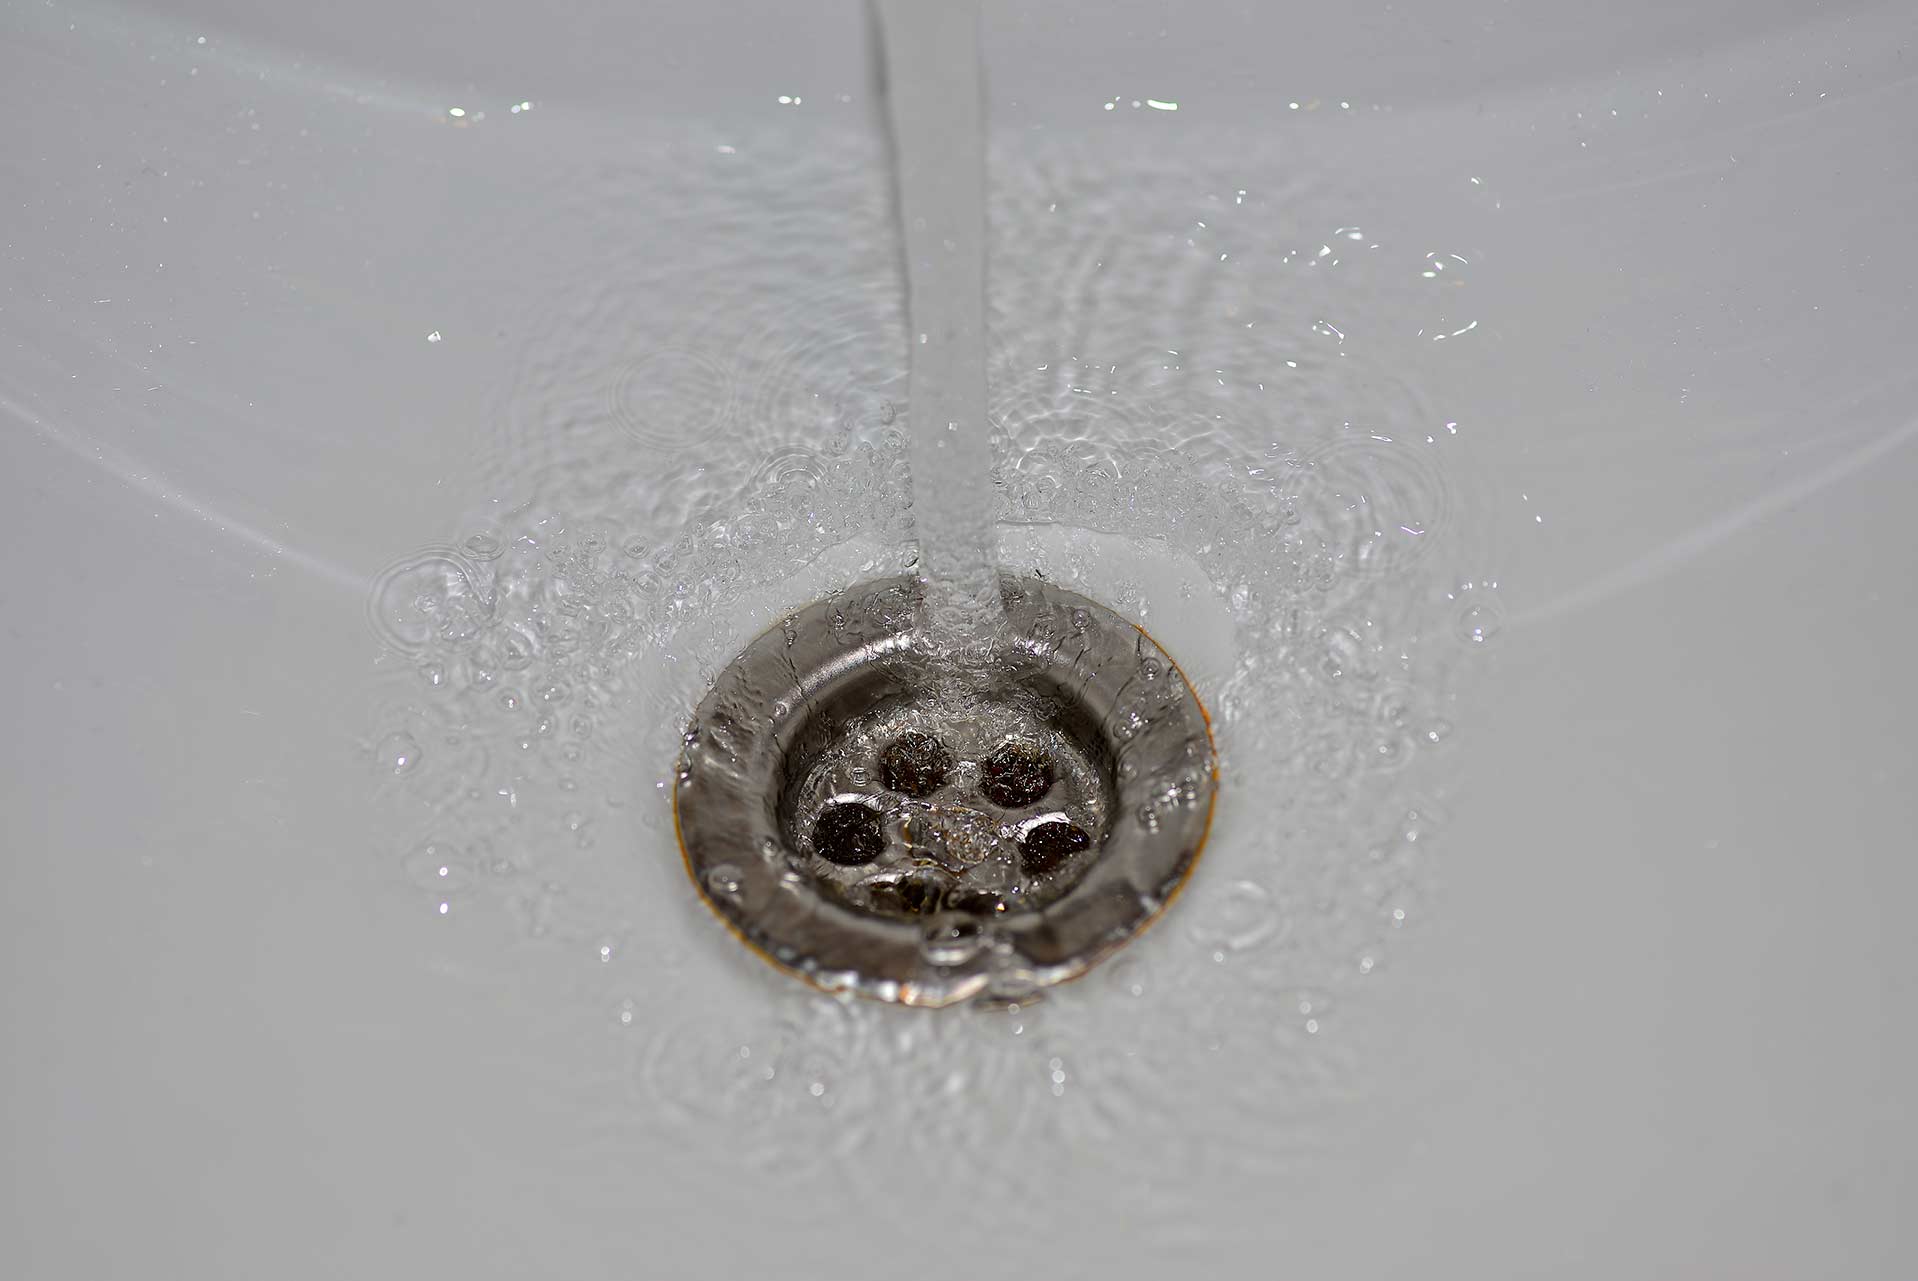 A2B Drains provides services to unblock blocked sinks and drains for properties in Spitalfields.